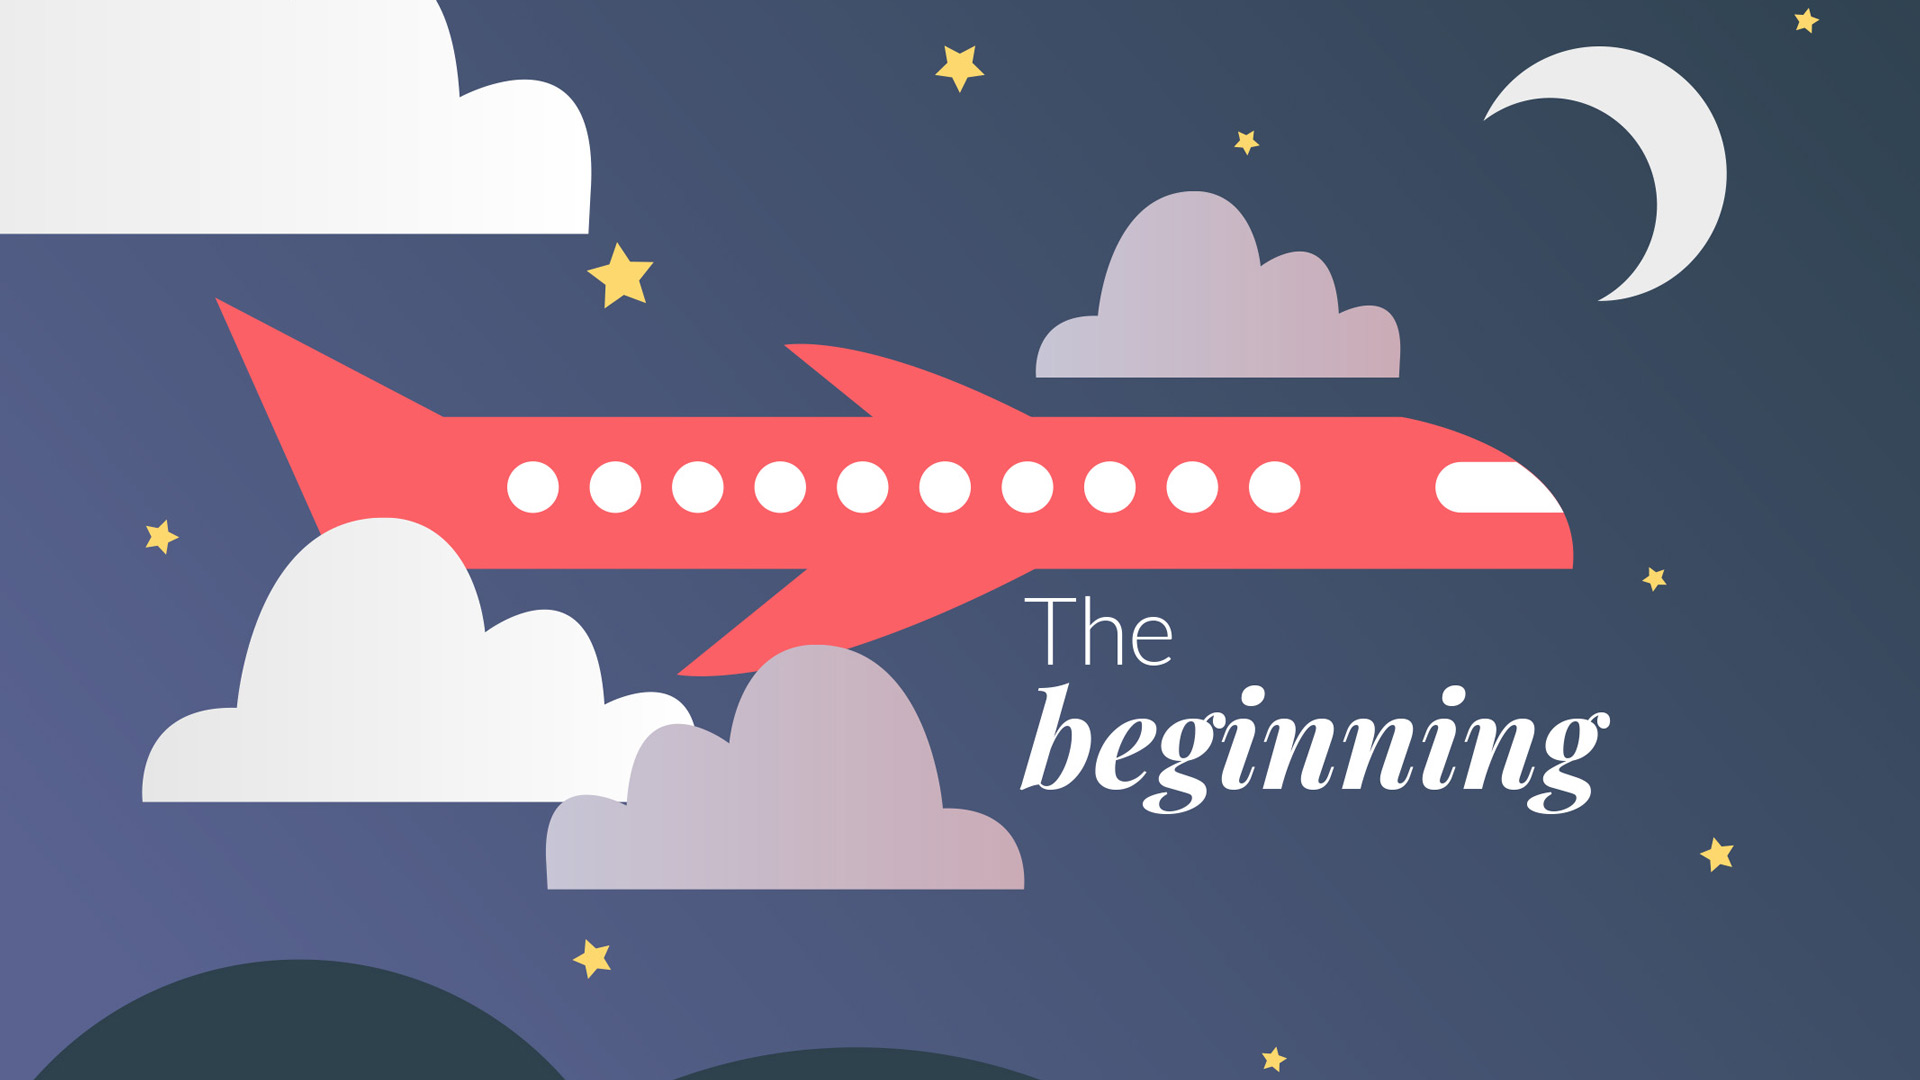 Vector illustration of a night sky with an orange aeroplane. The image includes the words 'The Beginning' in white text.